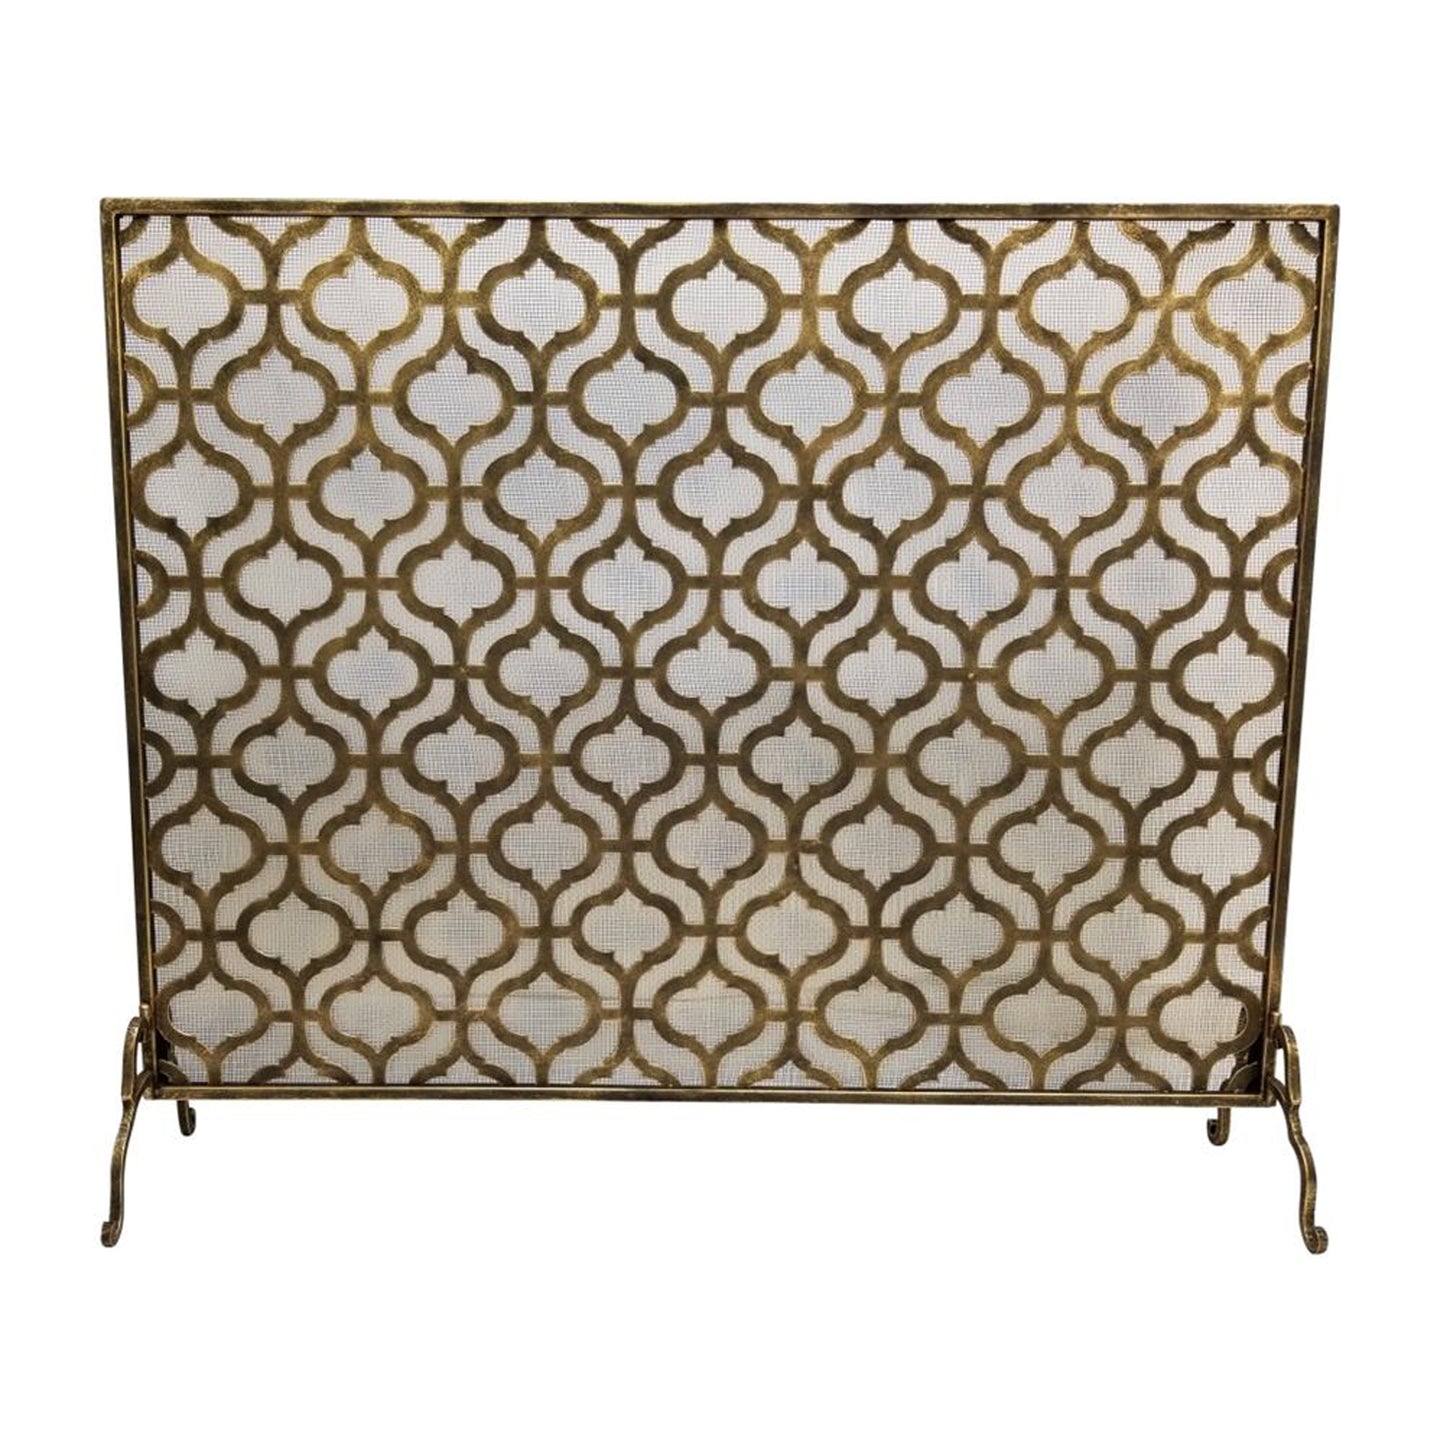 Large Single Panel Fireplace Screen in Light Burnished Gold